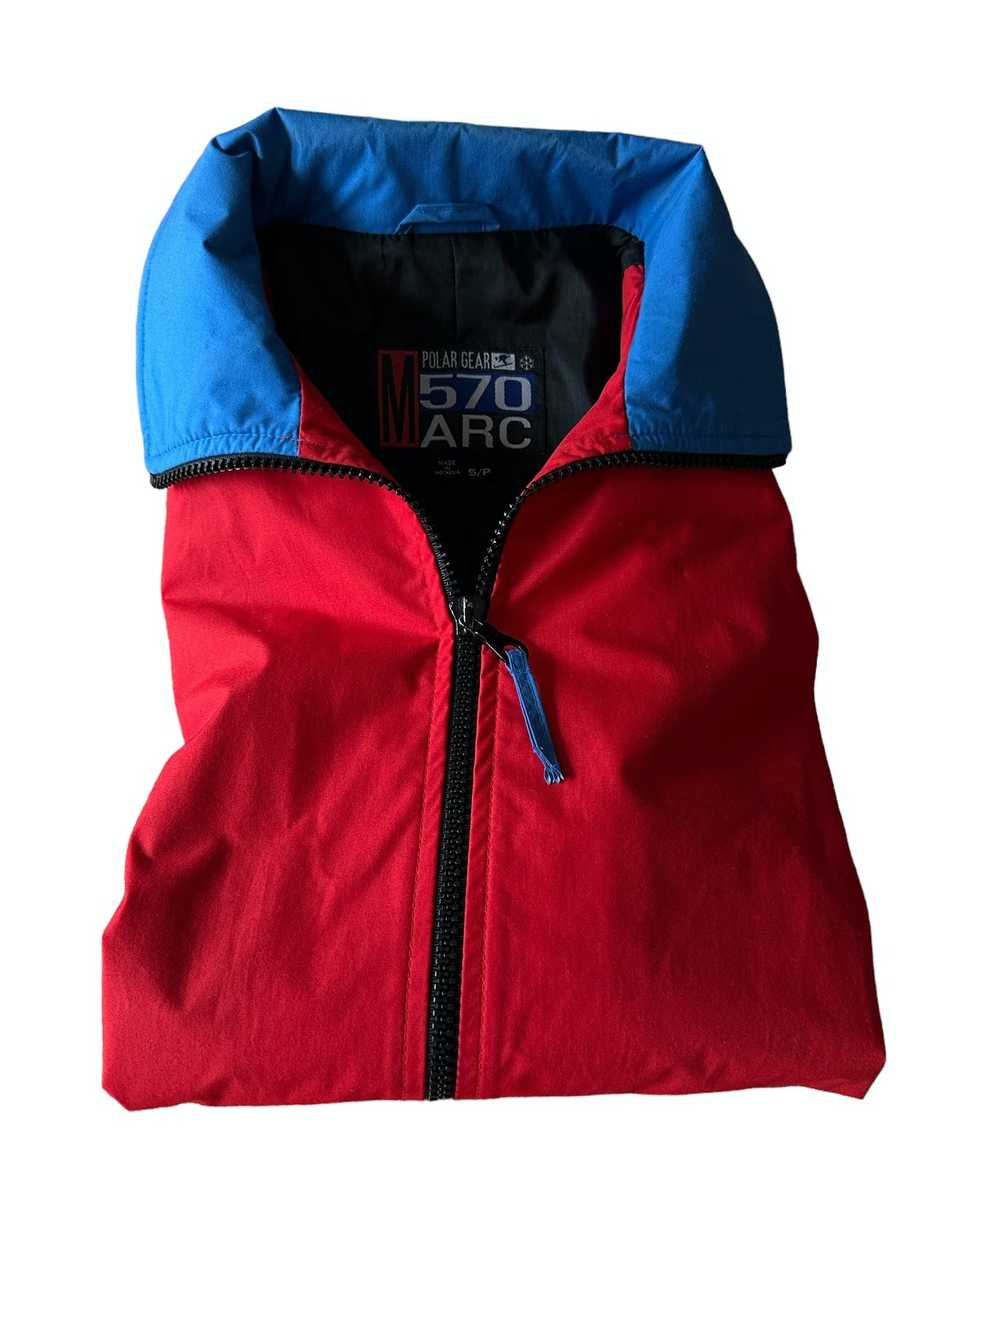 Other Womens Vintage Polar Gear Outerwear Jacket - image 10